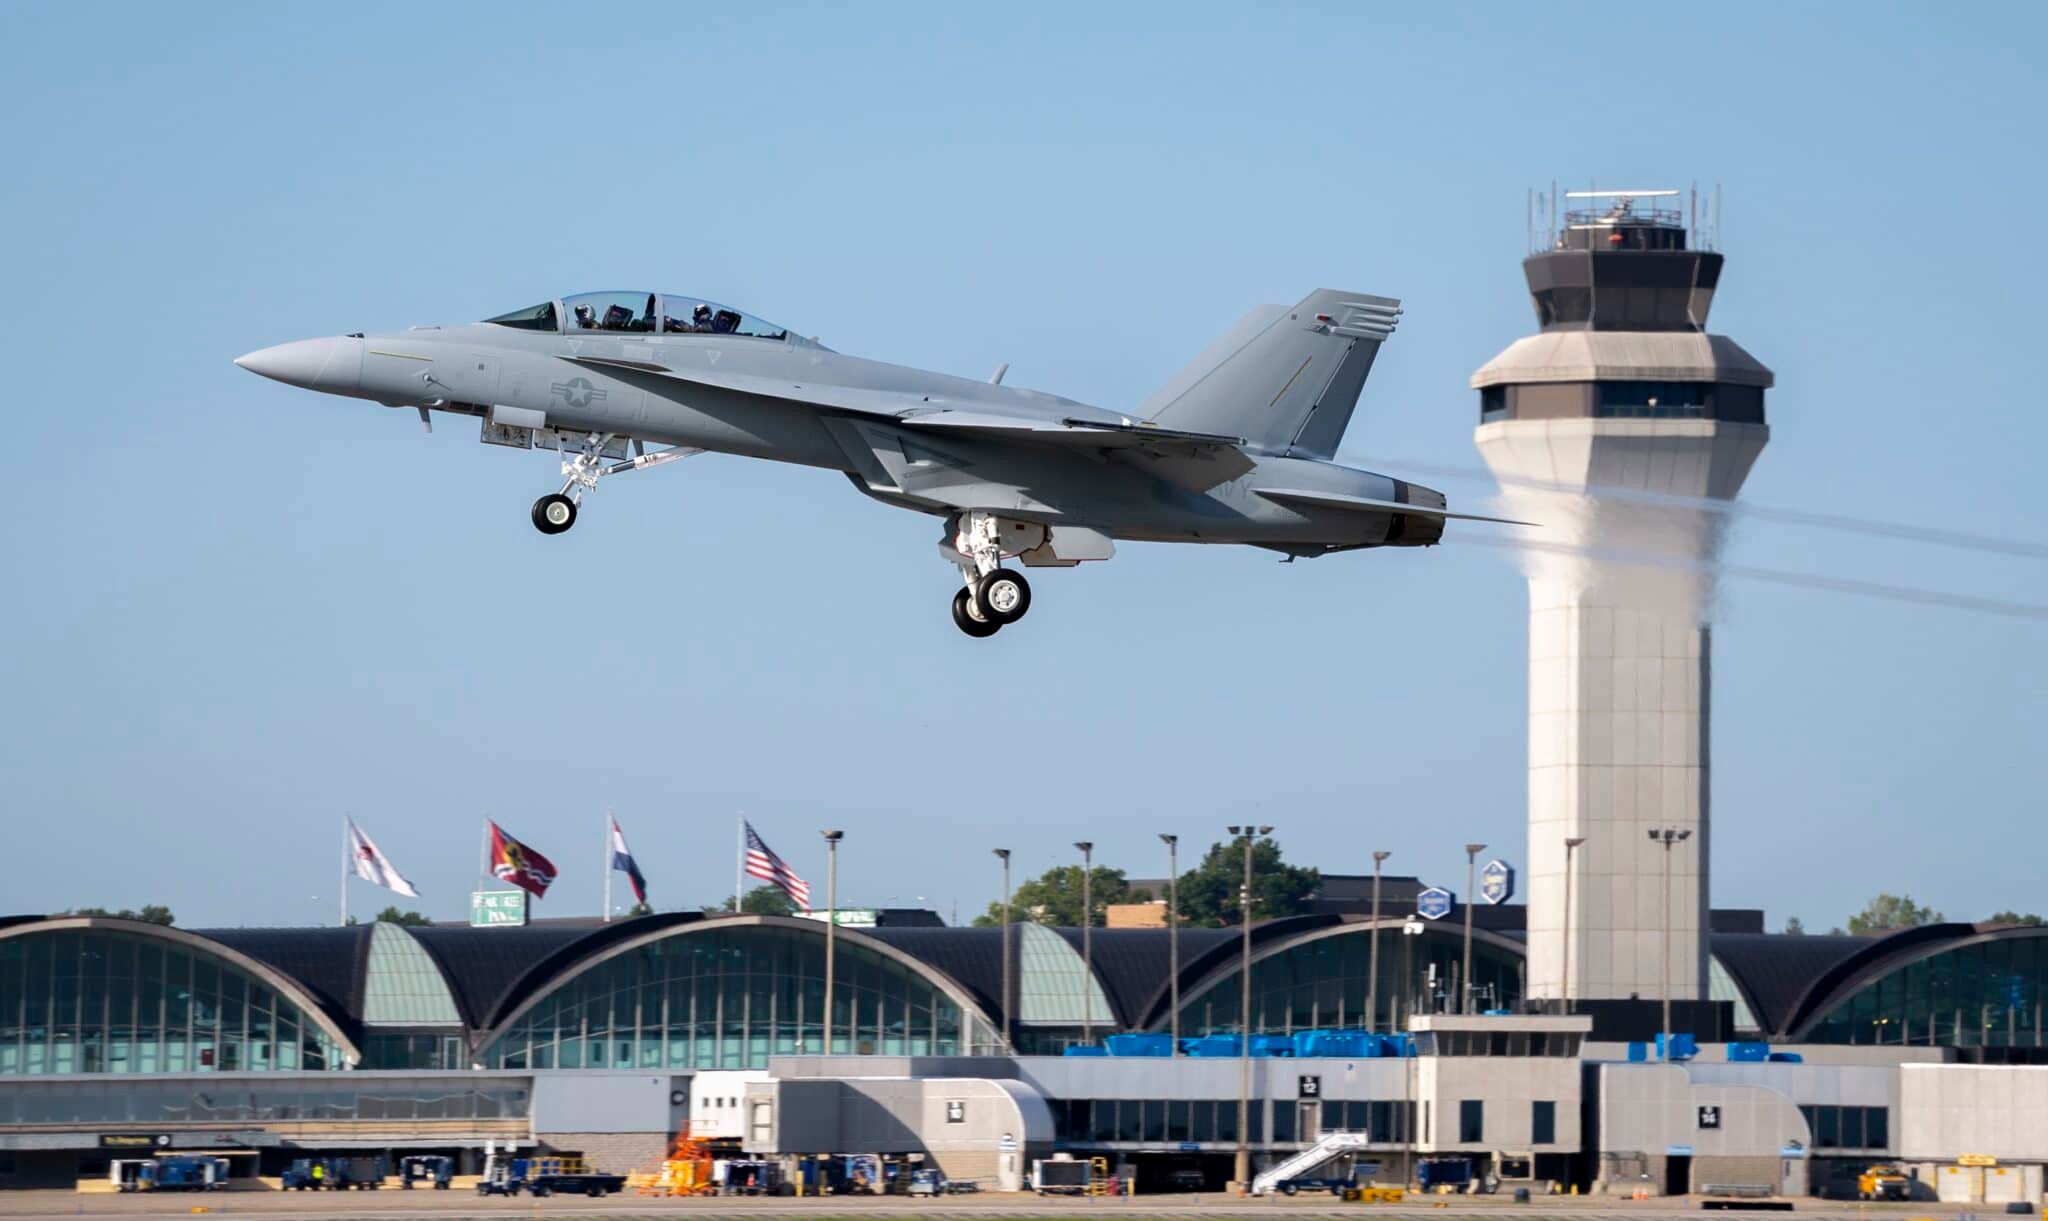 Boeing-Delivers-First-Operational-Block-III-FA-18-Super-Hornet-to-the-U.S.-Navy-scaled